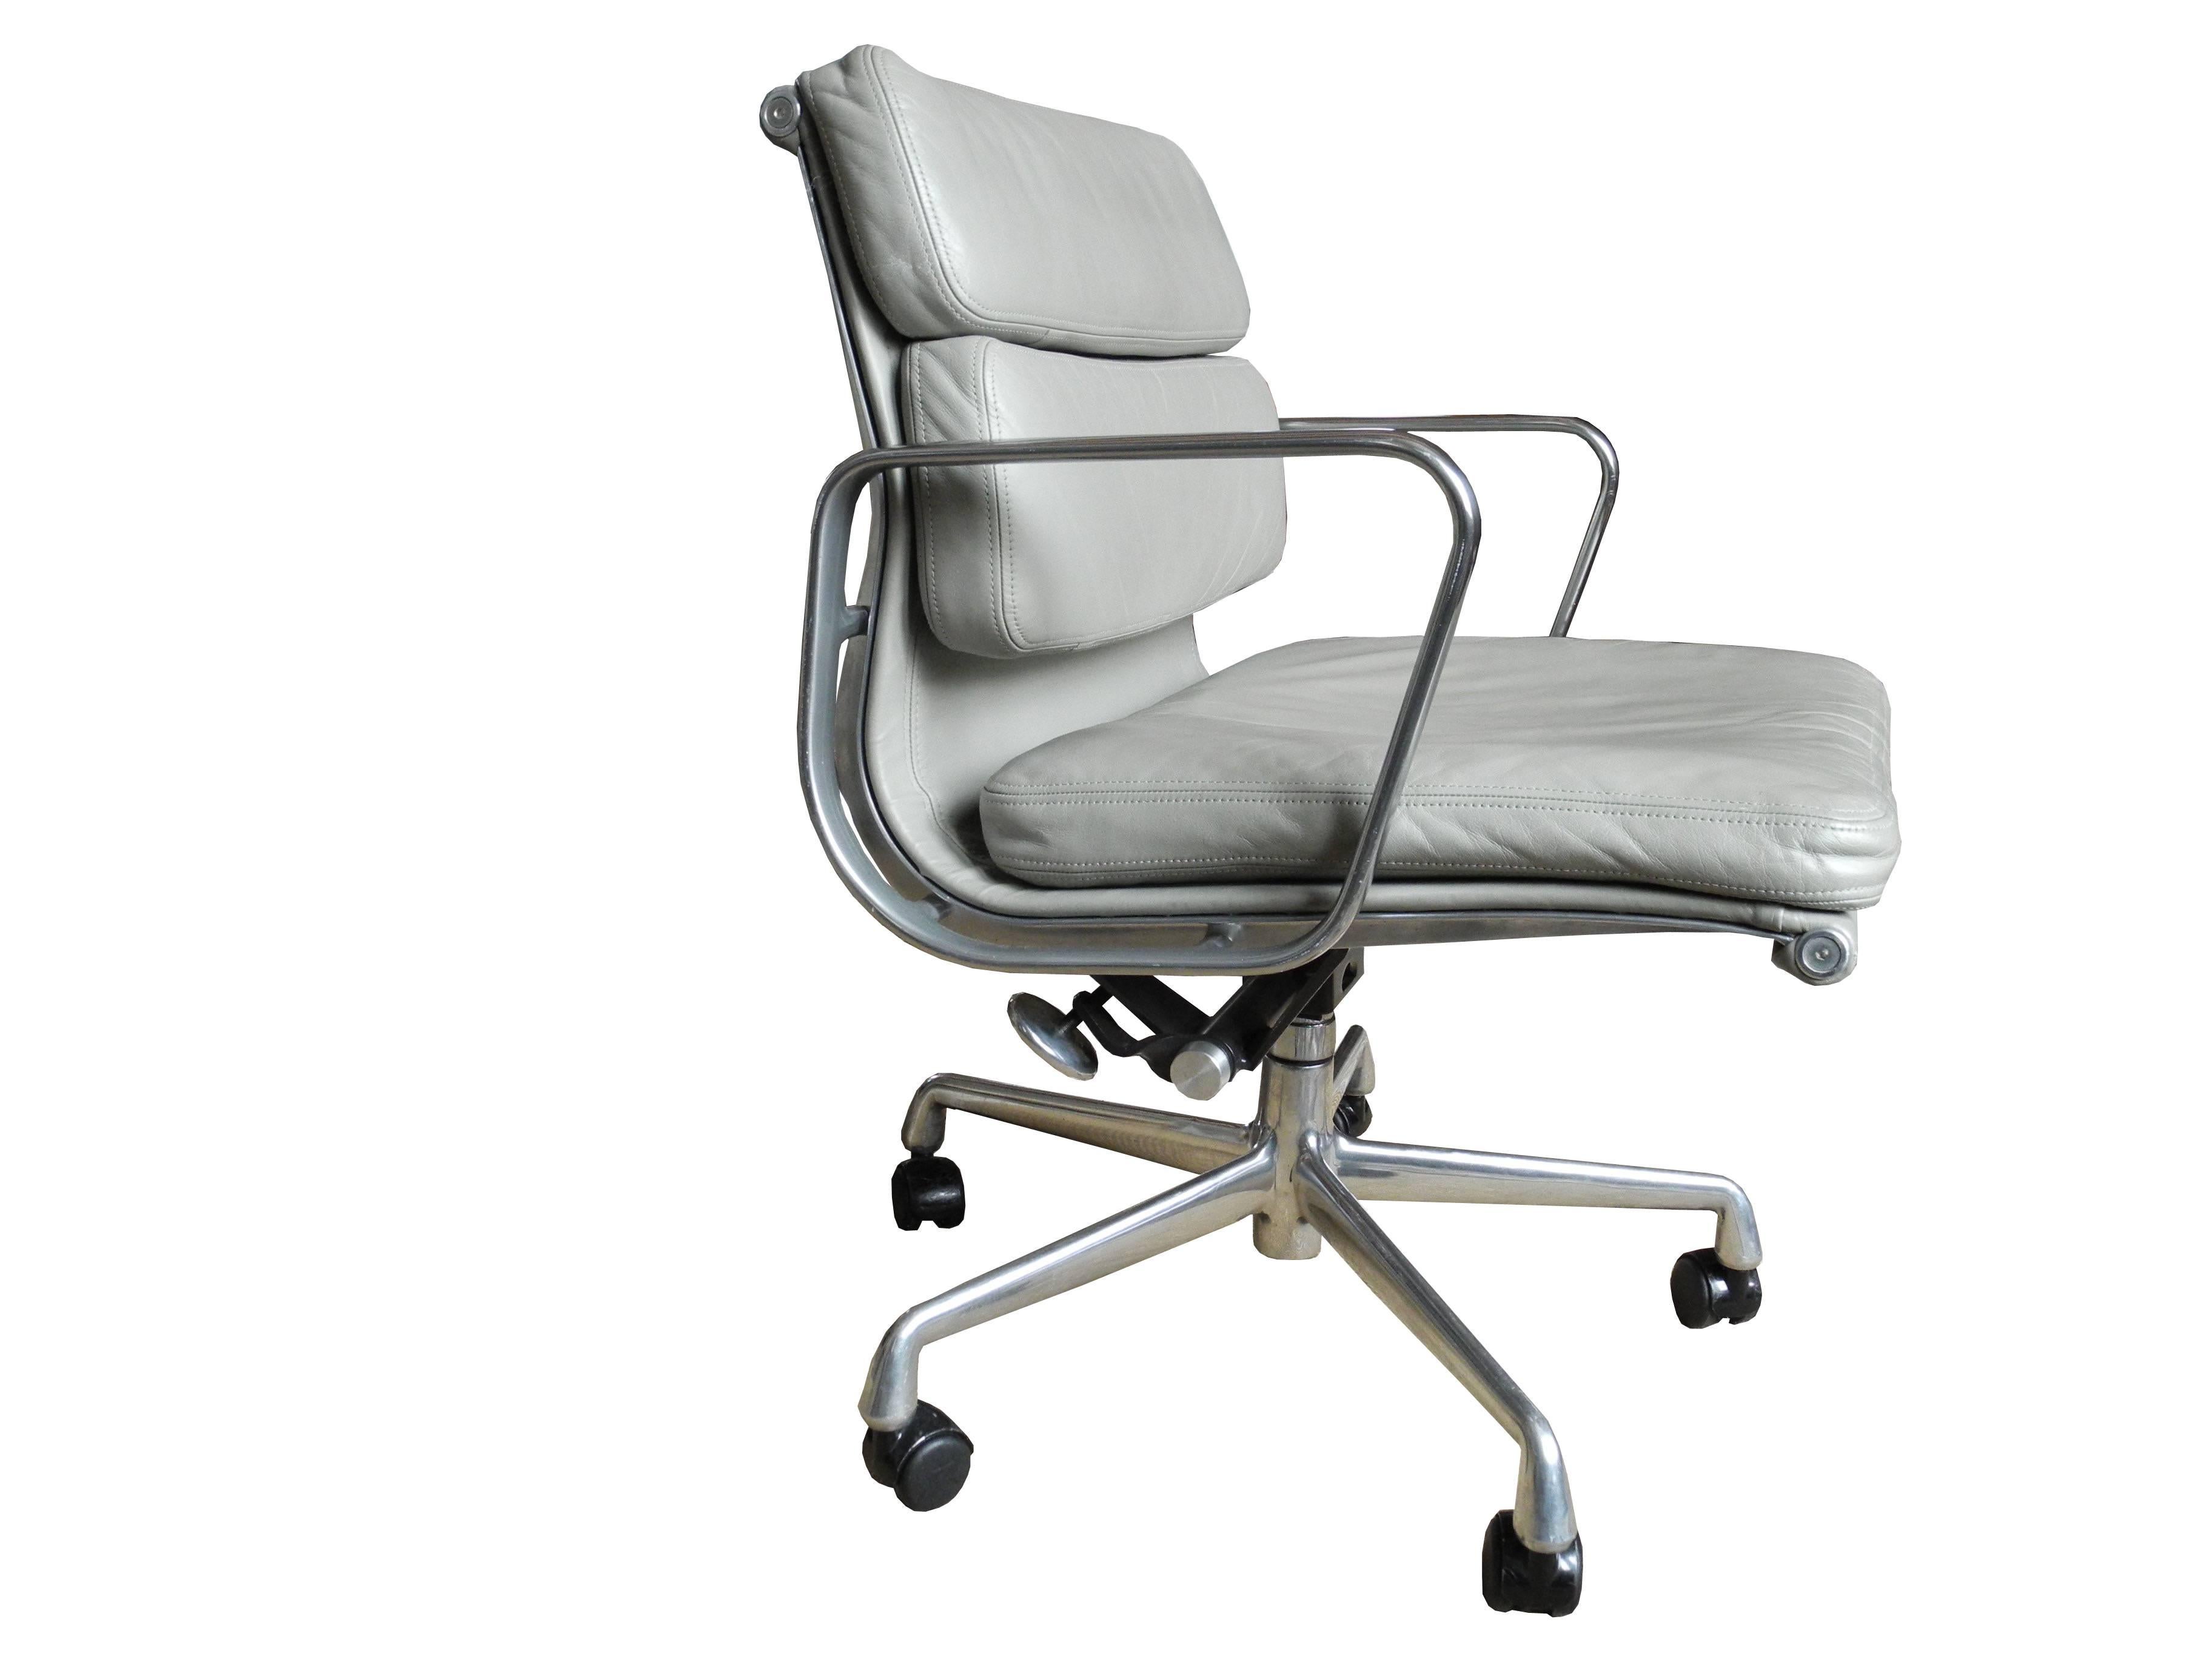 Charles and Ray Eames low back soft pad office or desk chair in light gray leather with adjustable seat.